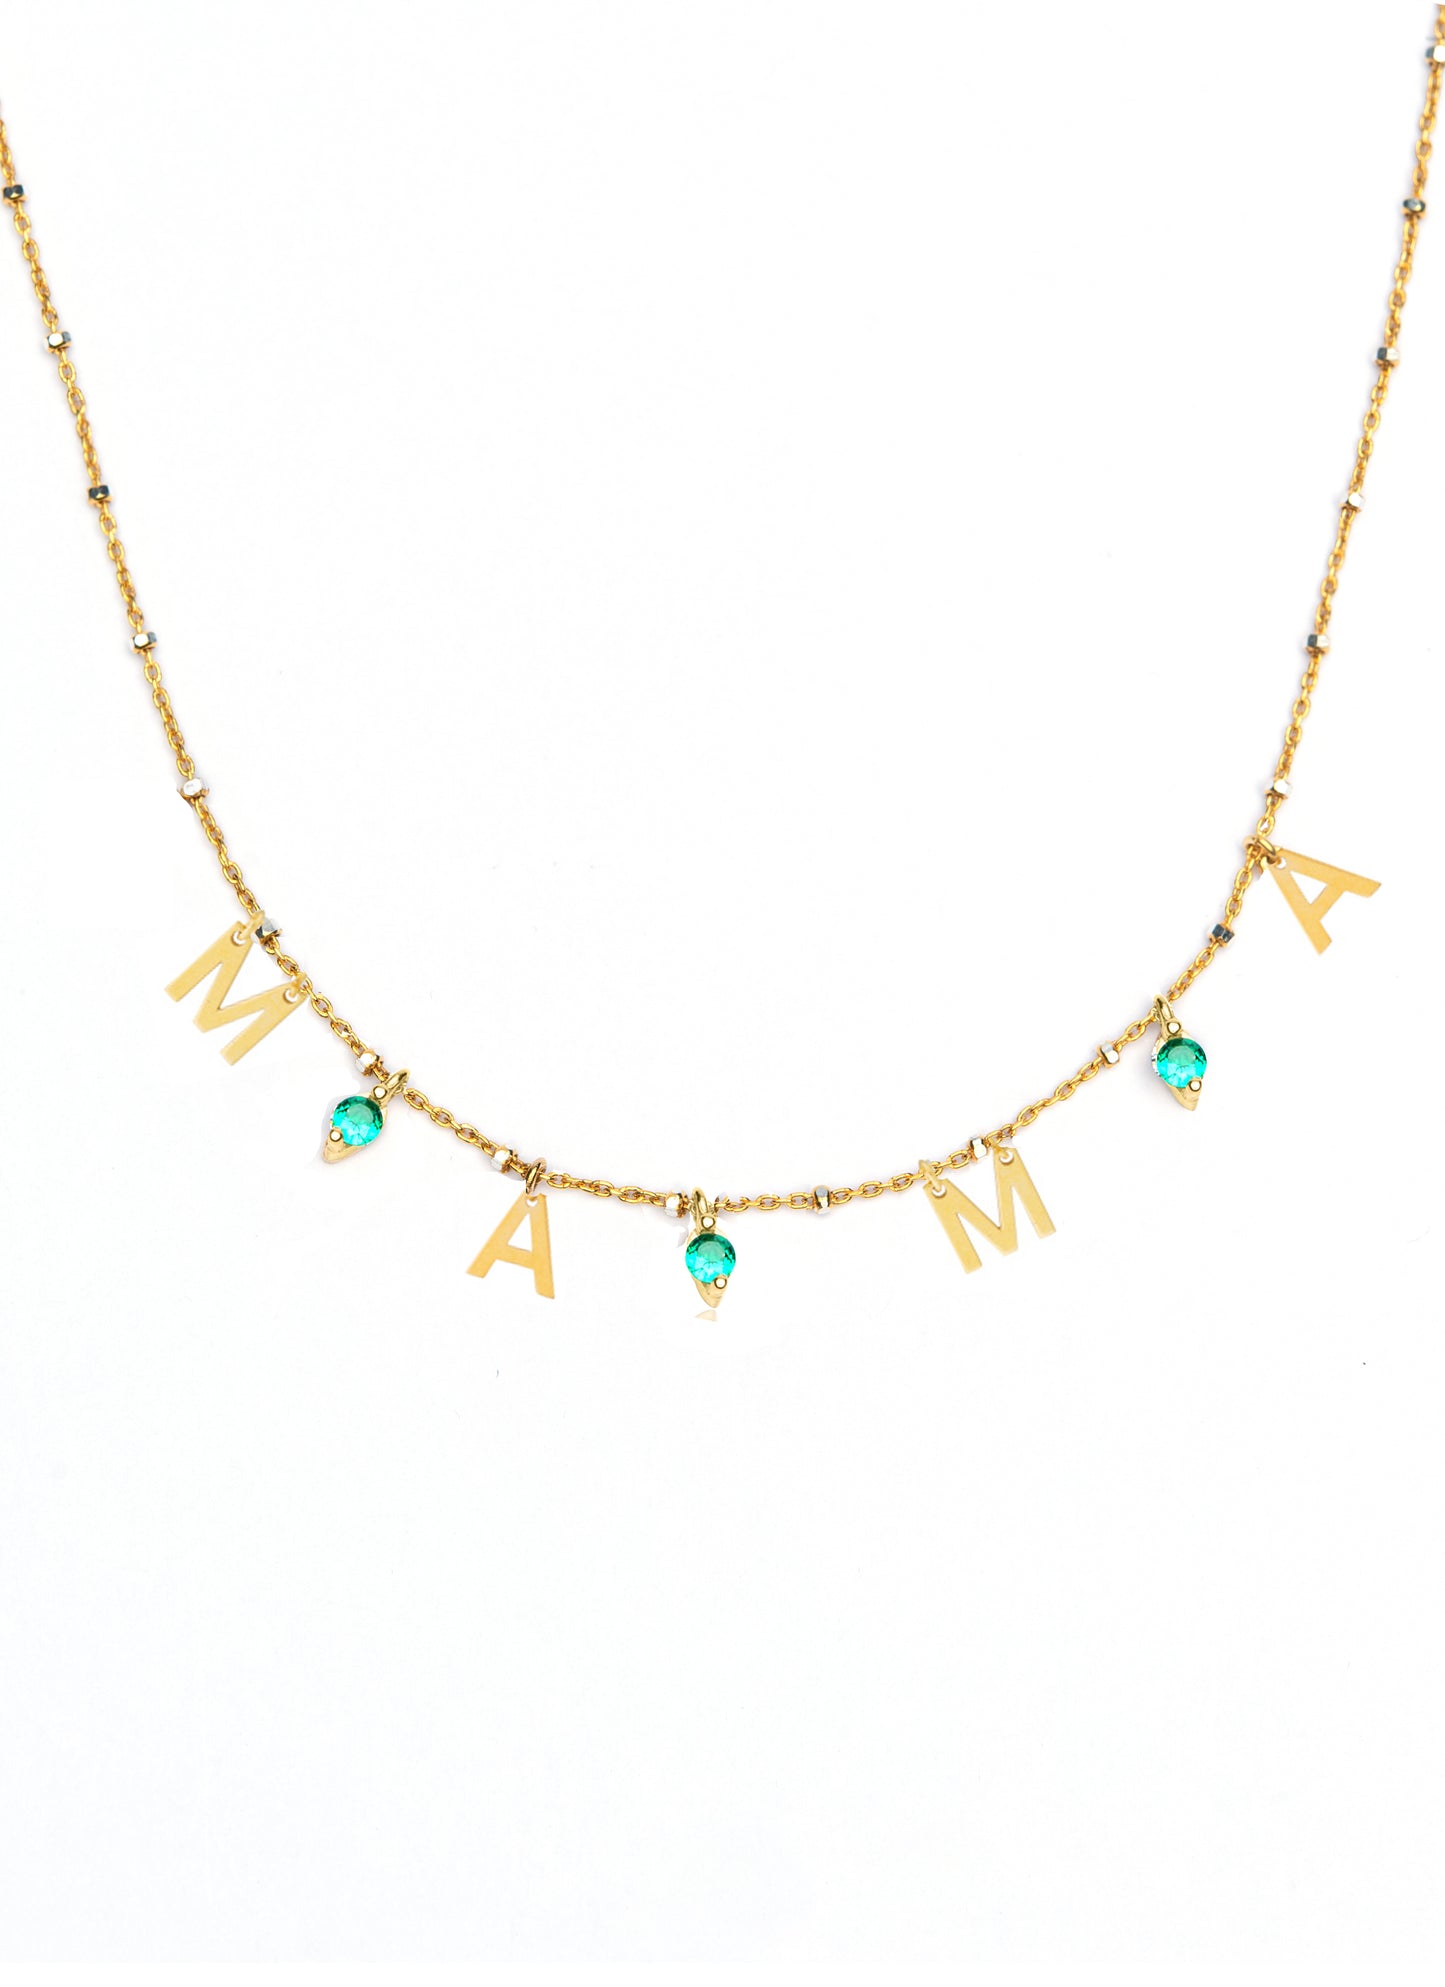 Mama necklace with emerald stone - Gold Plated